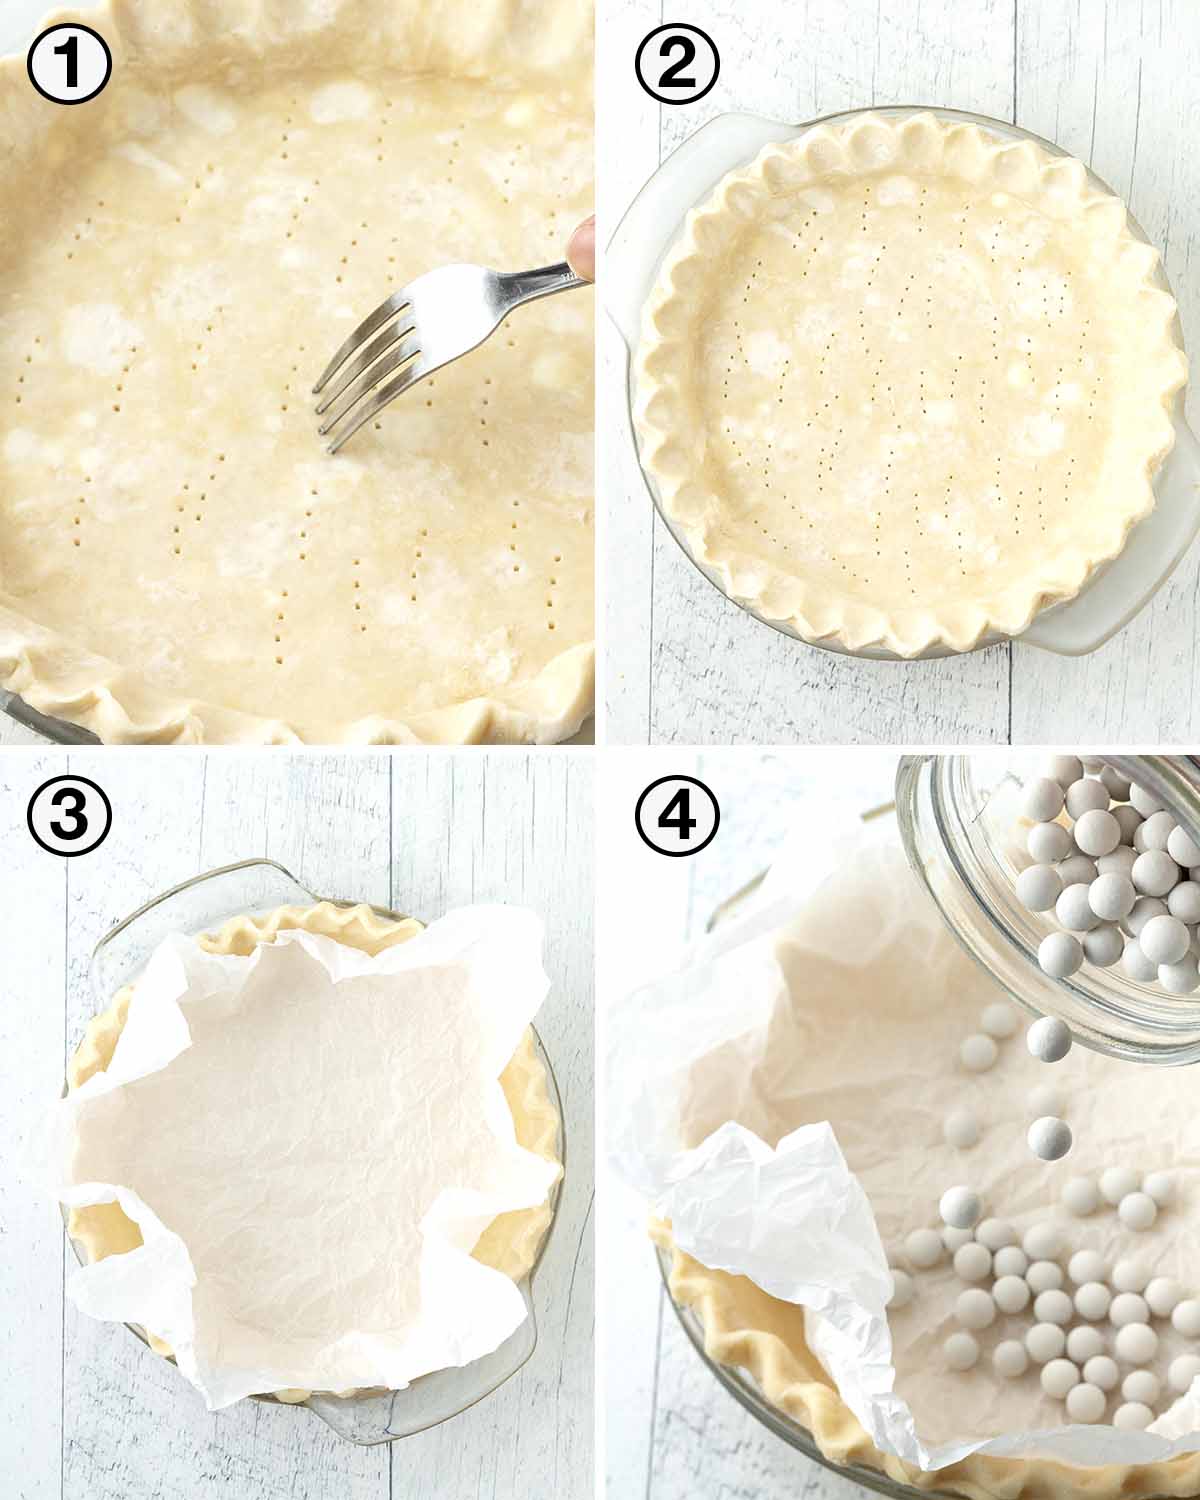 A collage of four images showing the first sequence of steps needed to bake an empty pie crust.